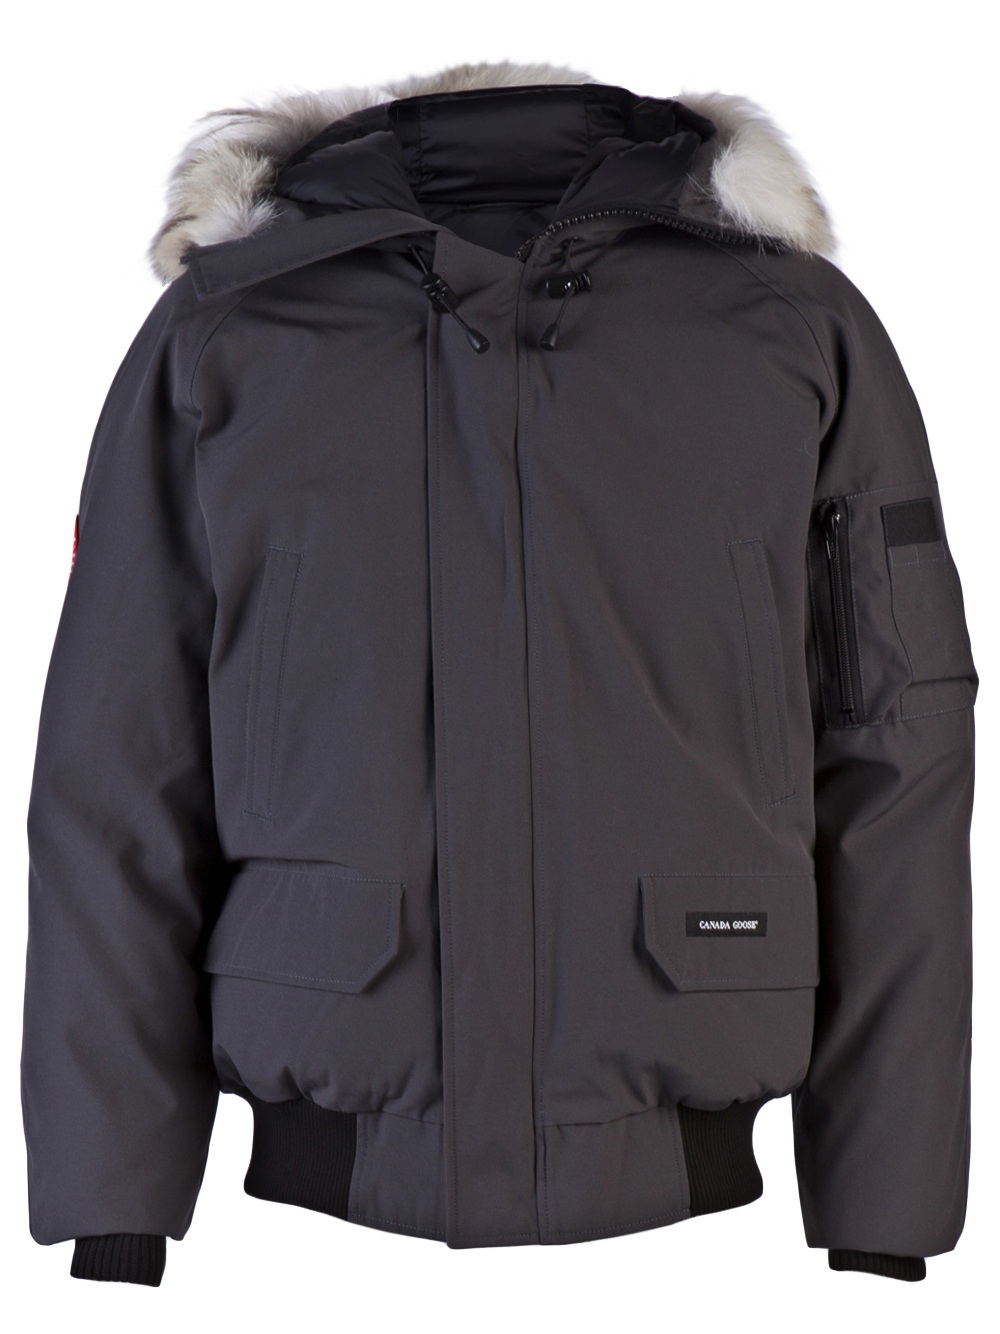 Lyst - Canada Goose Chilliwack Bomber in Gray for Men